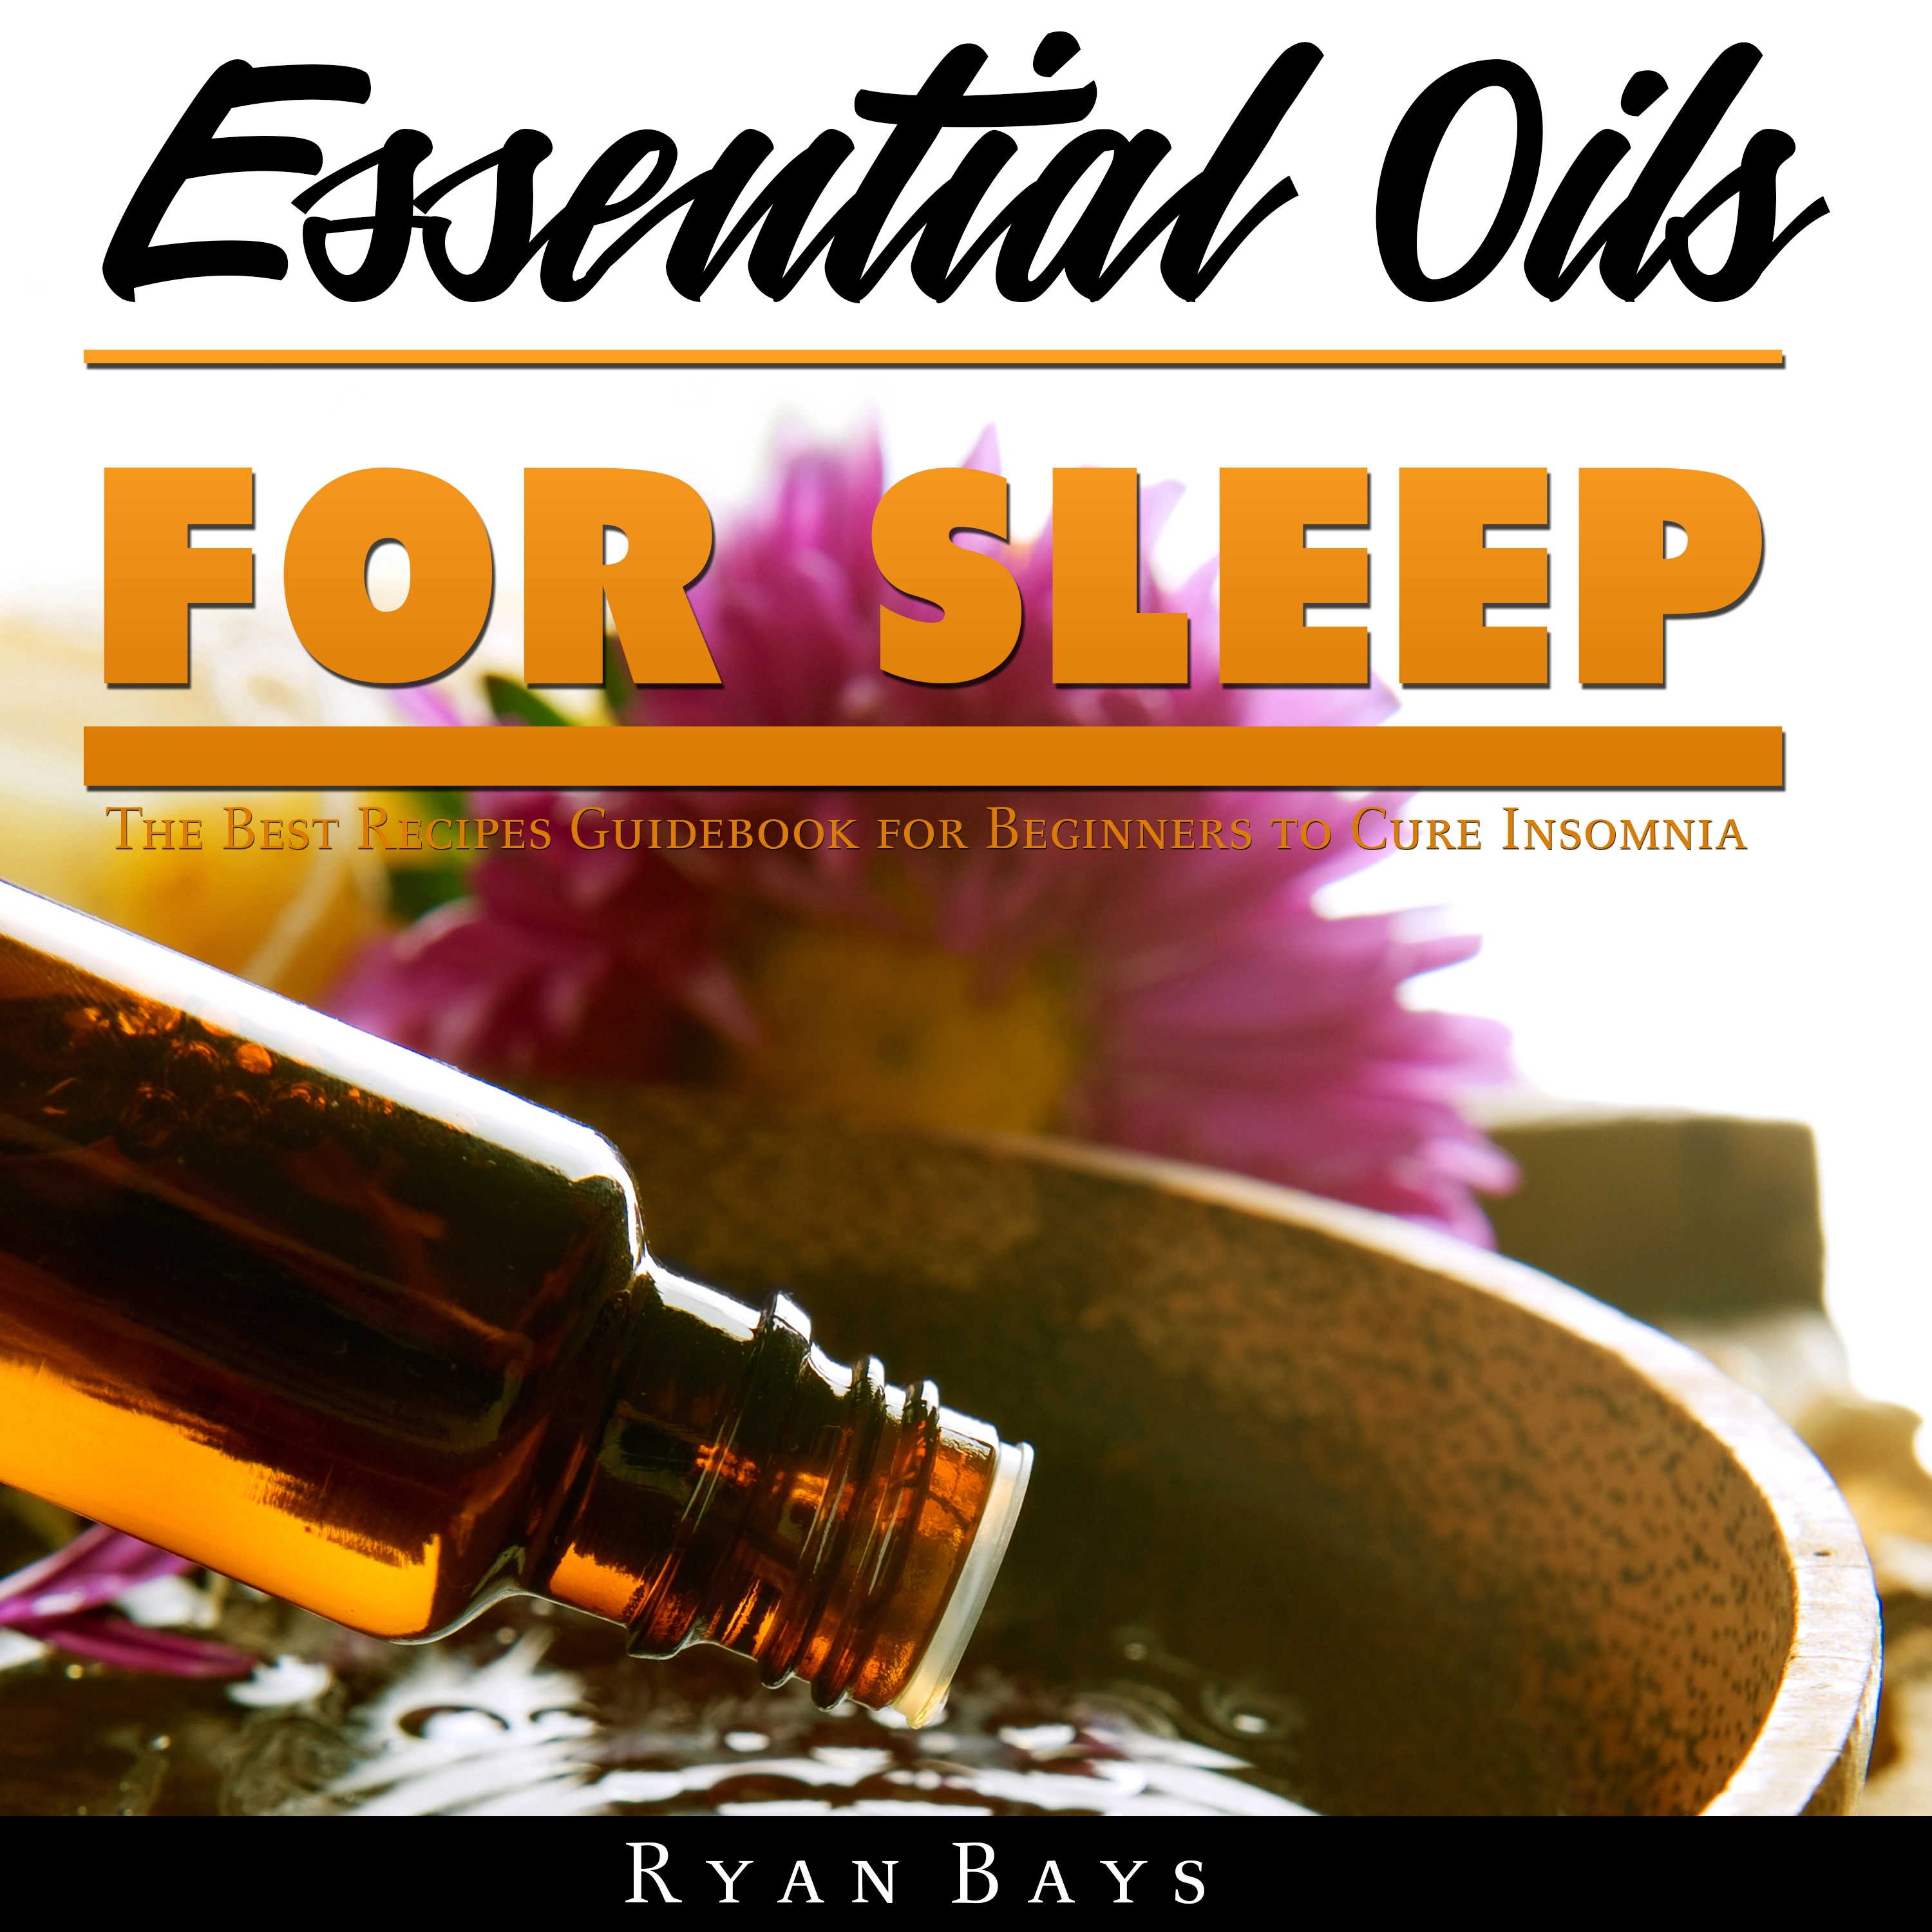 Essential Oils for Sleep: The Best Recipes Guidebook for Beginners to Cure Insomnia Audiobook by Ryan Bays